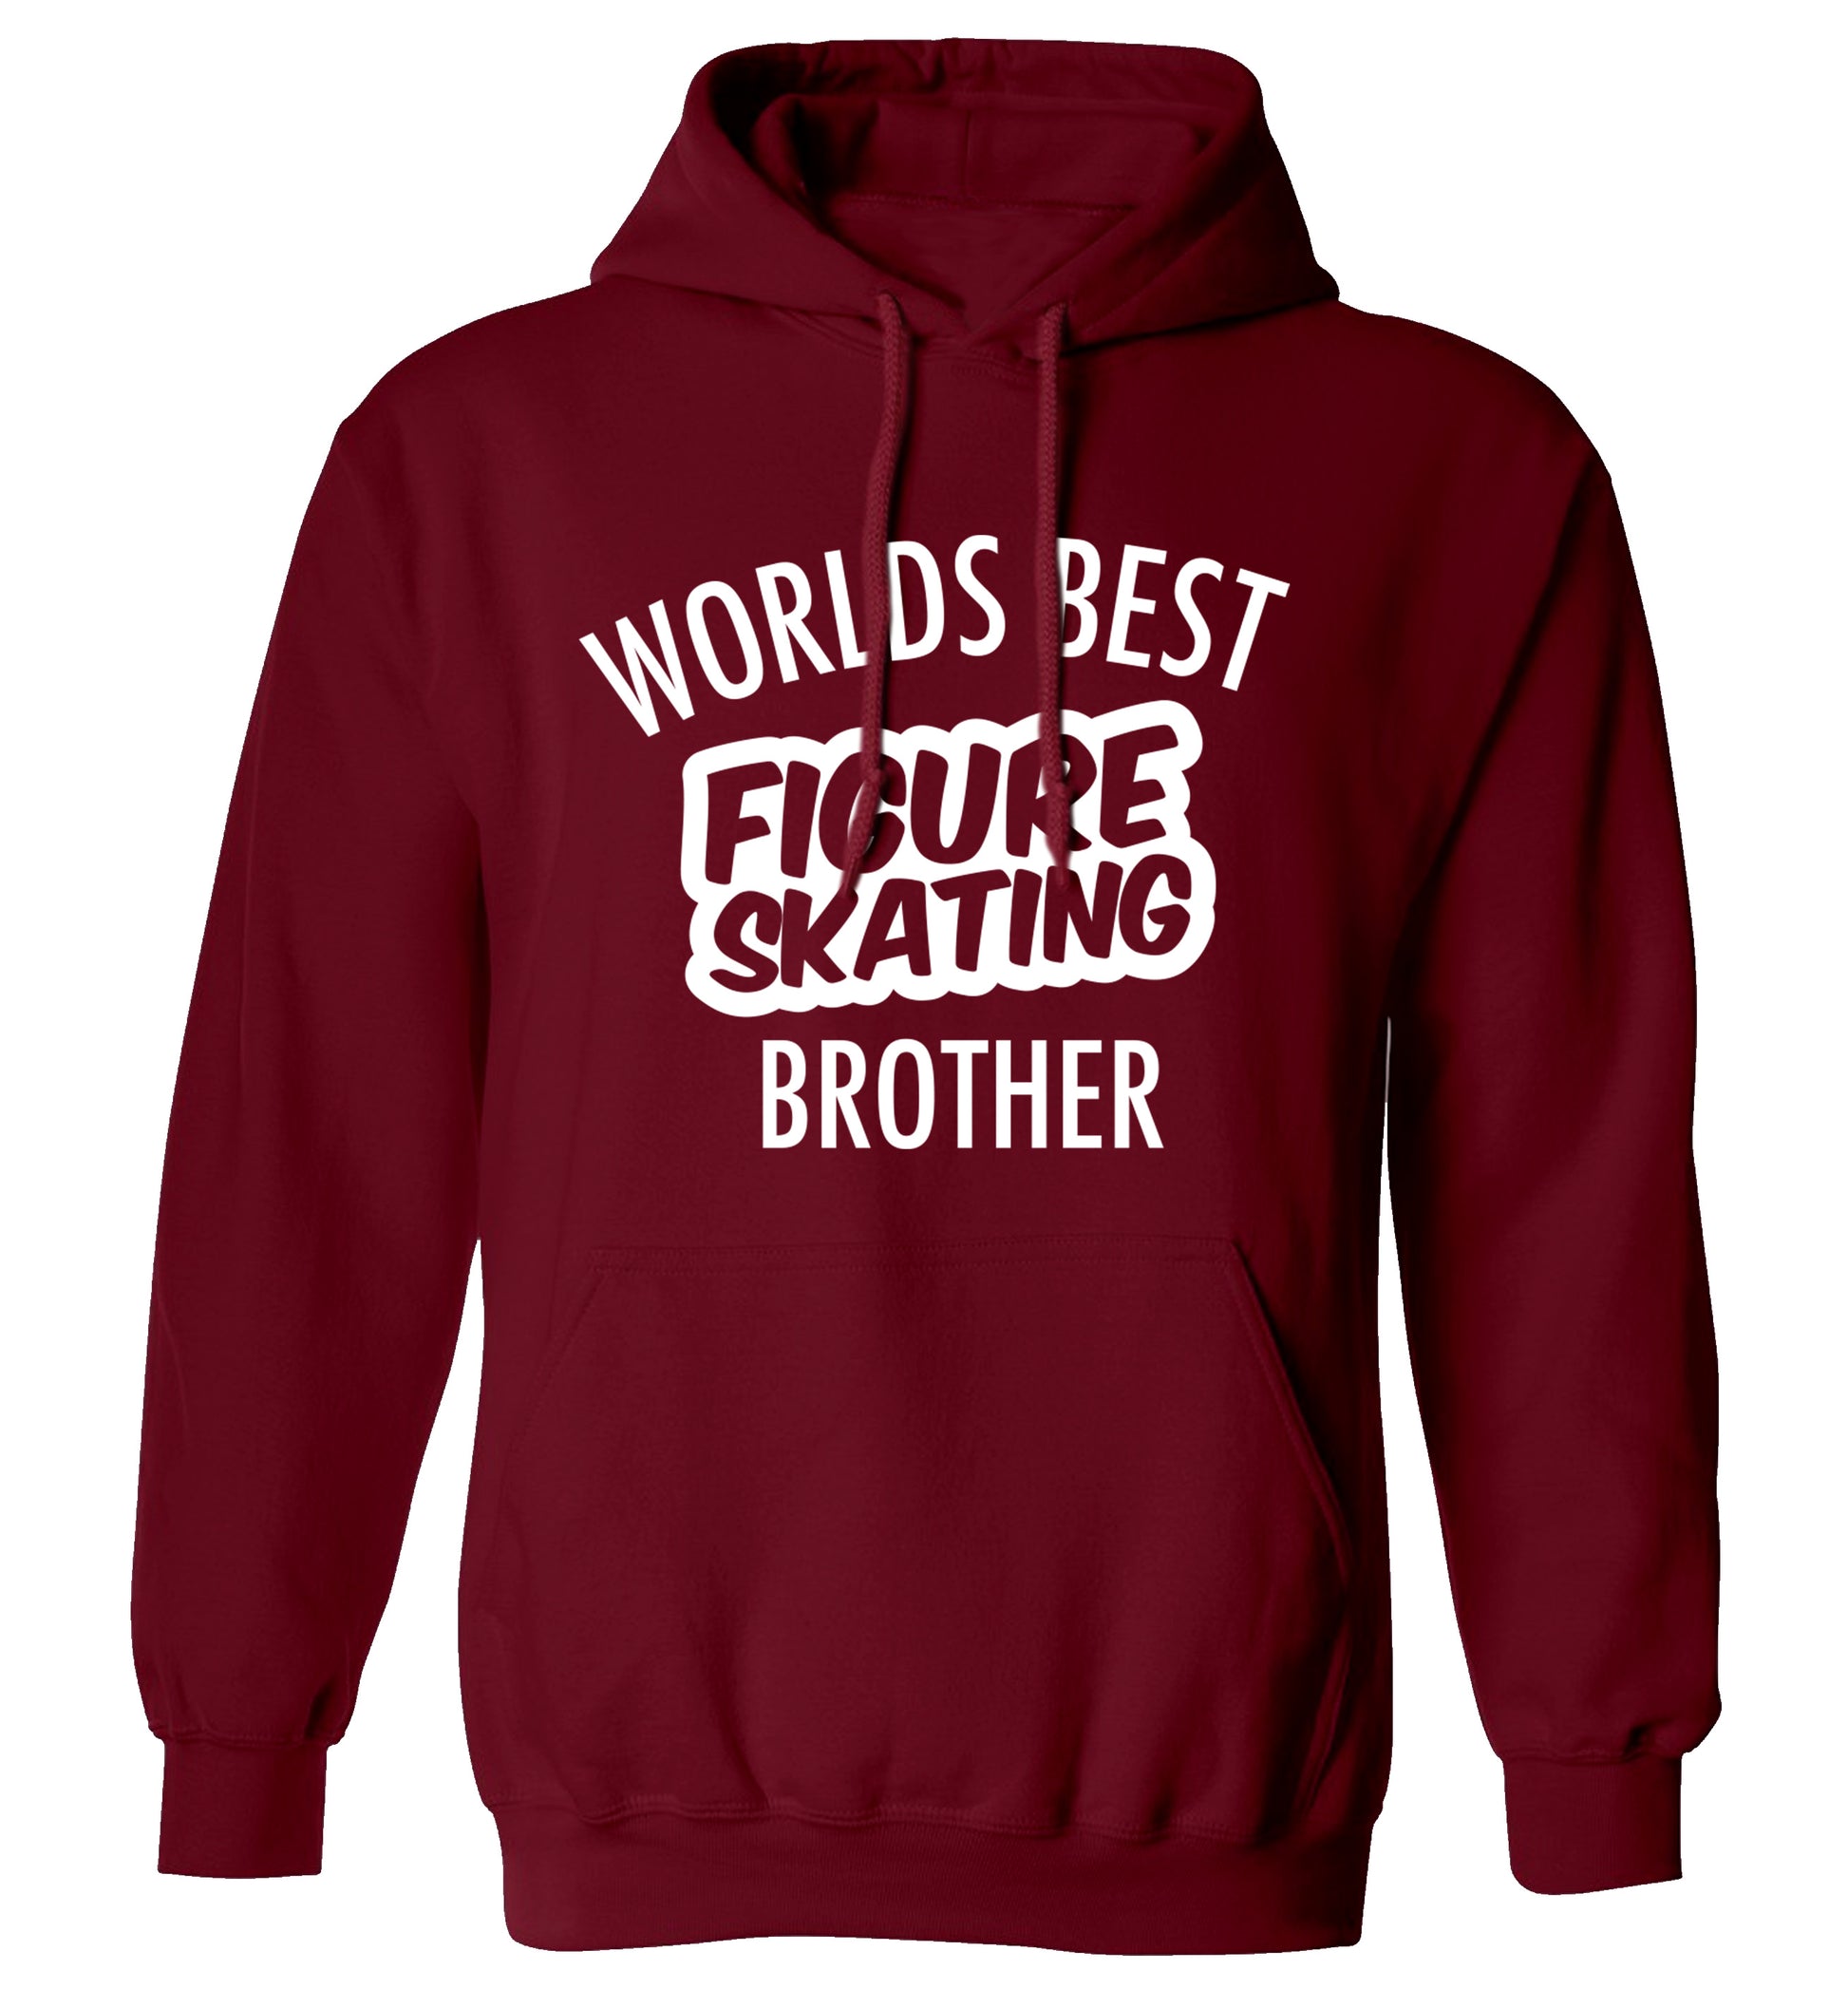 Worlds best figure skating brother adults unisexmaroon hoodie 2XL